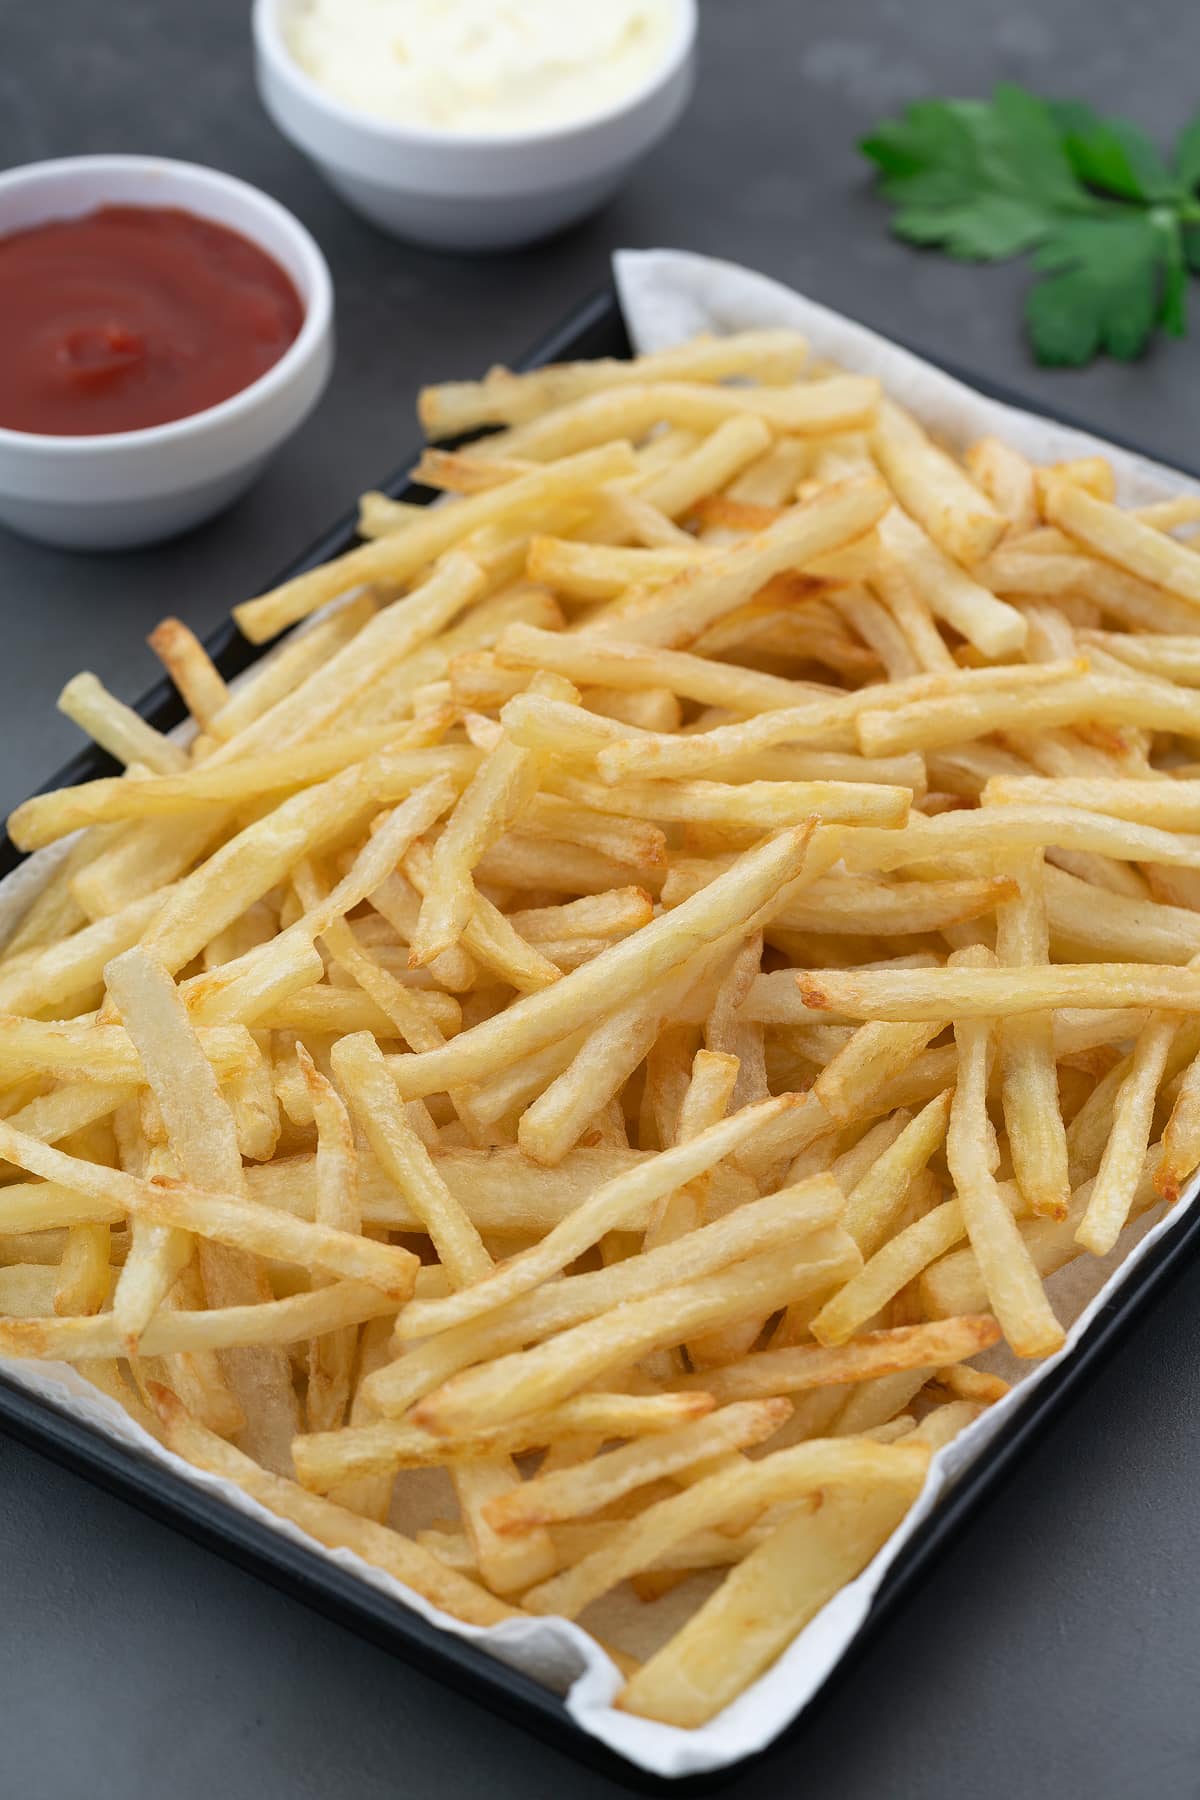 Golden Crispy Homemade French Fries in a black tray on a grey table with a cup of ketchup and mayonnaise placed nearby.